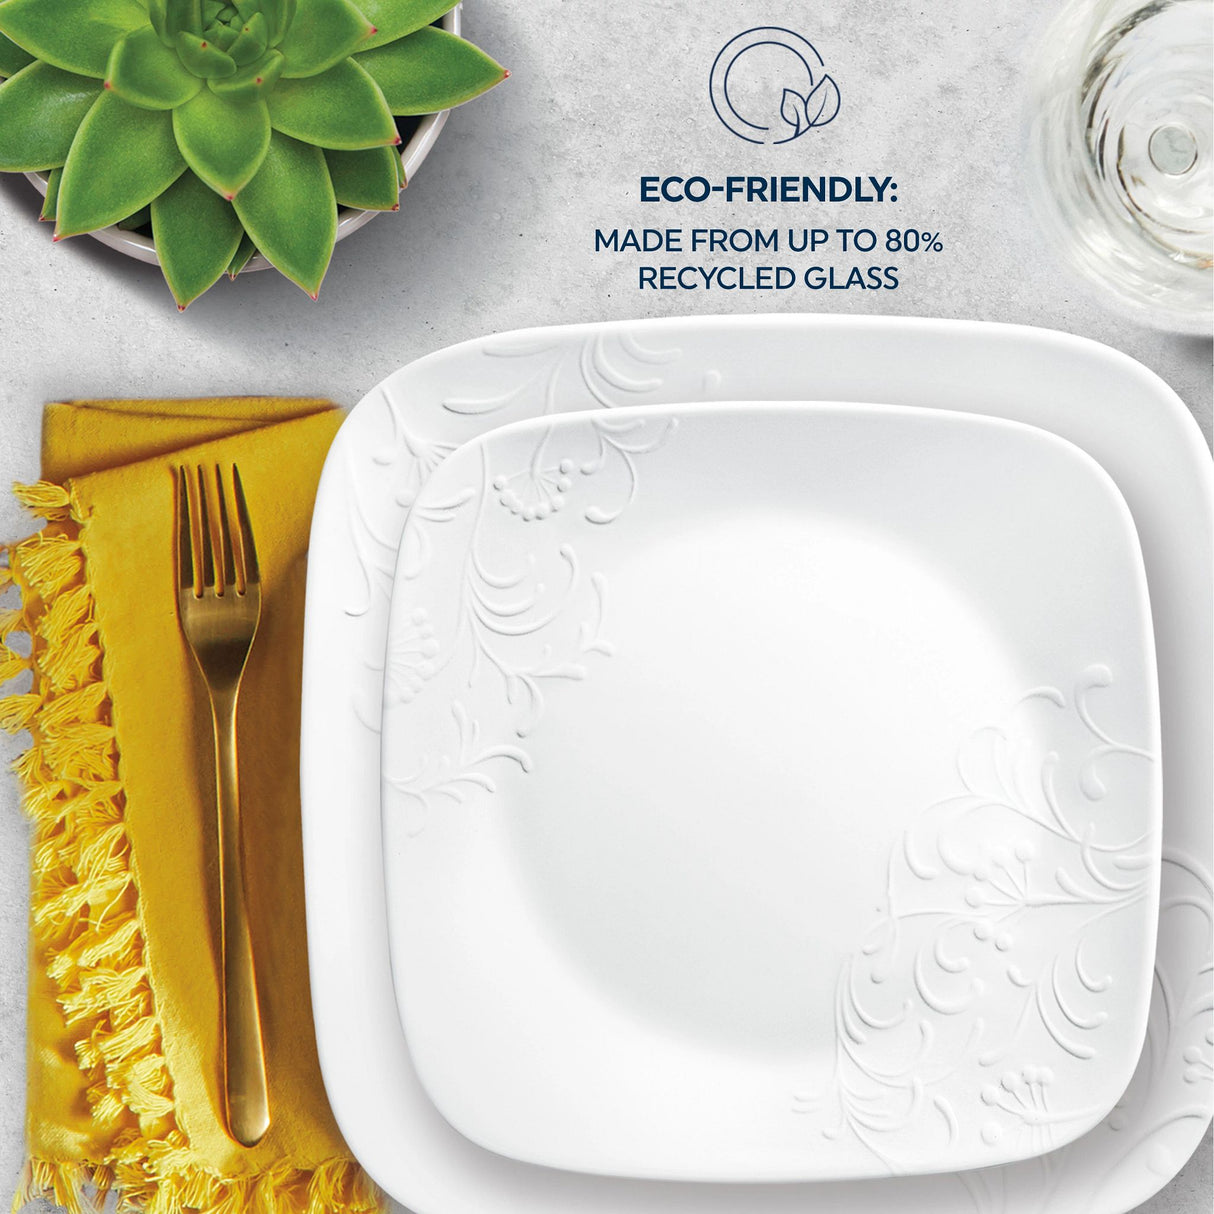  Cherish dinner &amp; salad plate ont he table with text eco-friendly made from up to 80% recycled glass 